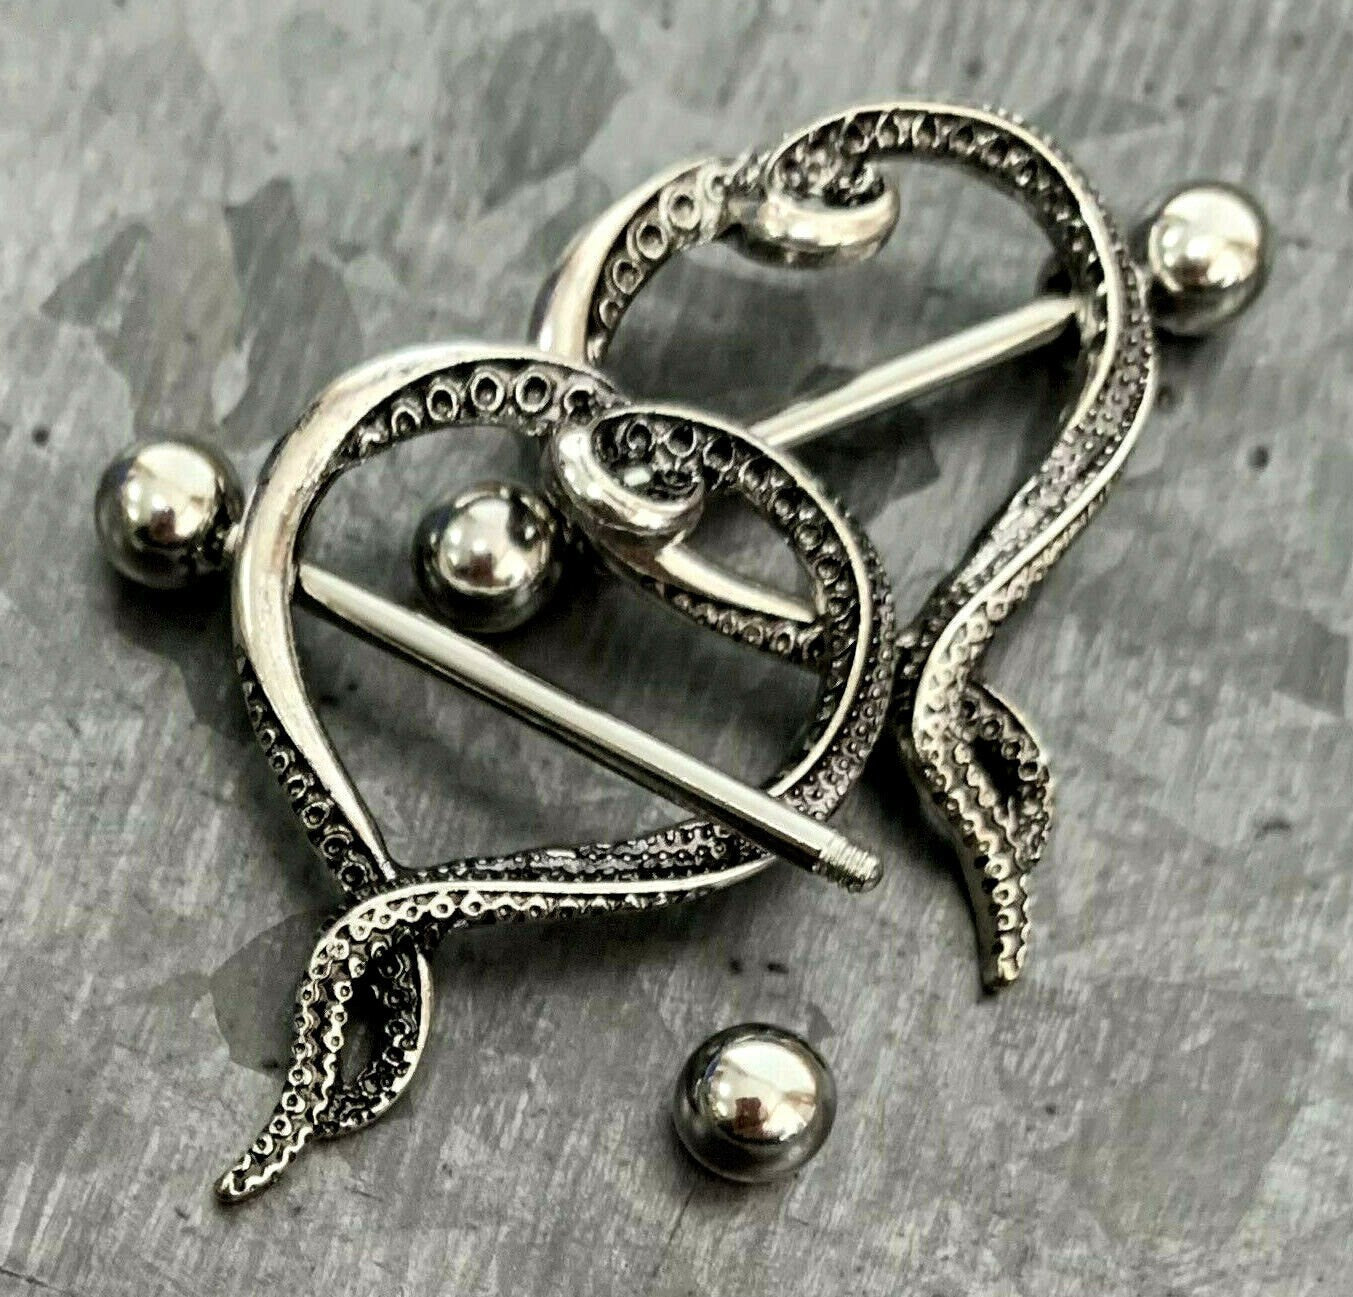 PAIR of Beautiful Heart Design with Tentacles Steel Nipple Barbells/Shields/Rings - Barbell 14g, 22mm (7/8"), Wearable length 16mm (5/8")!